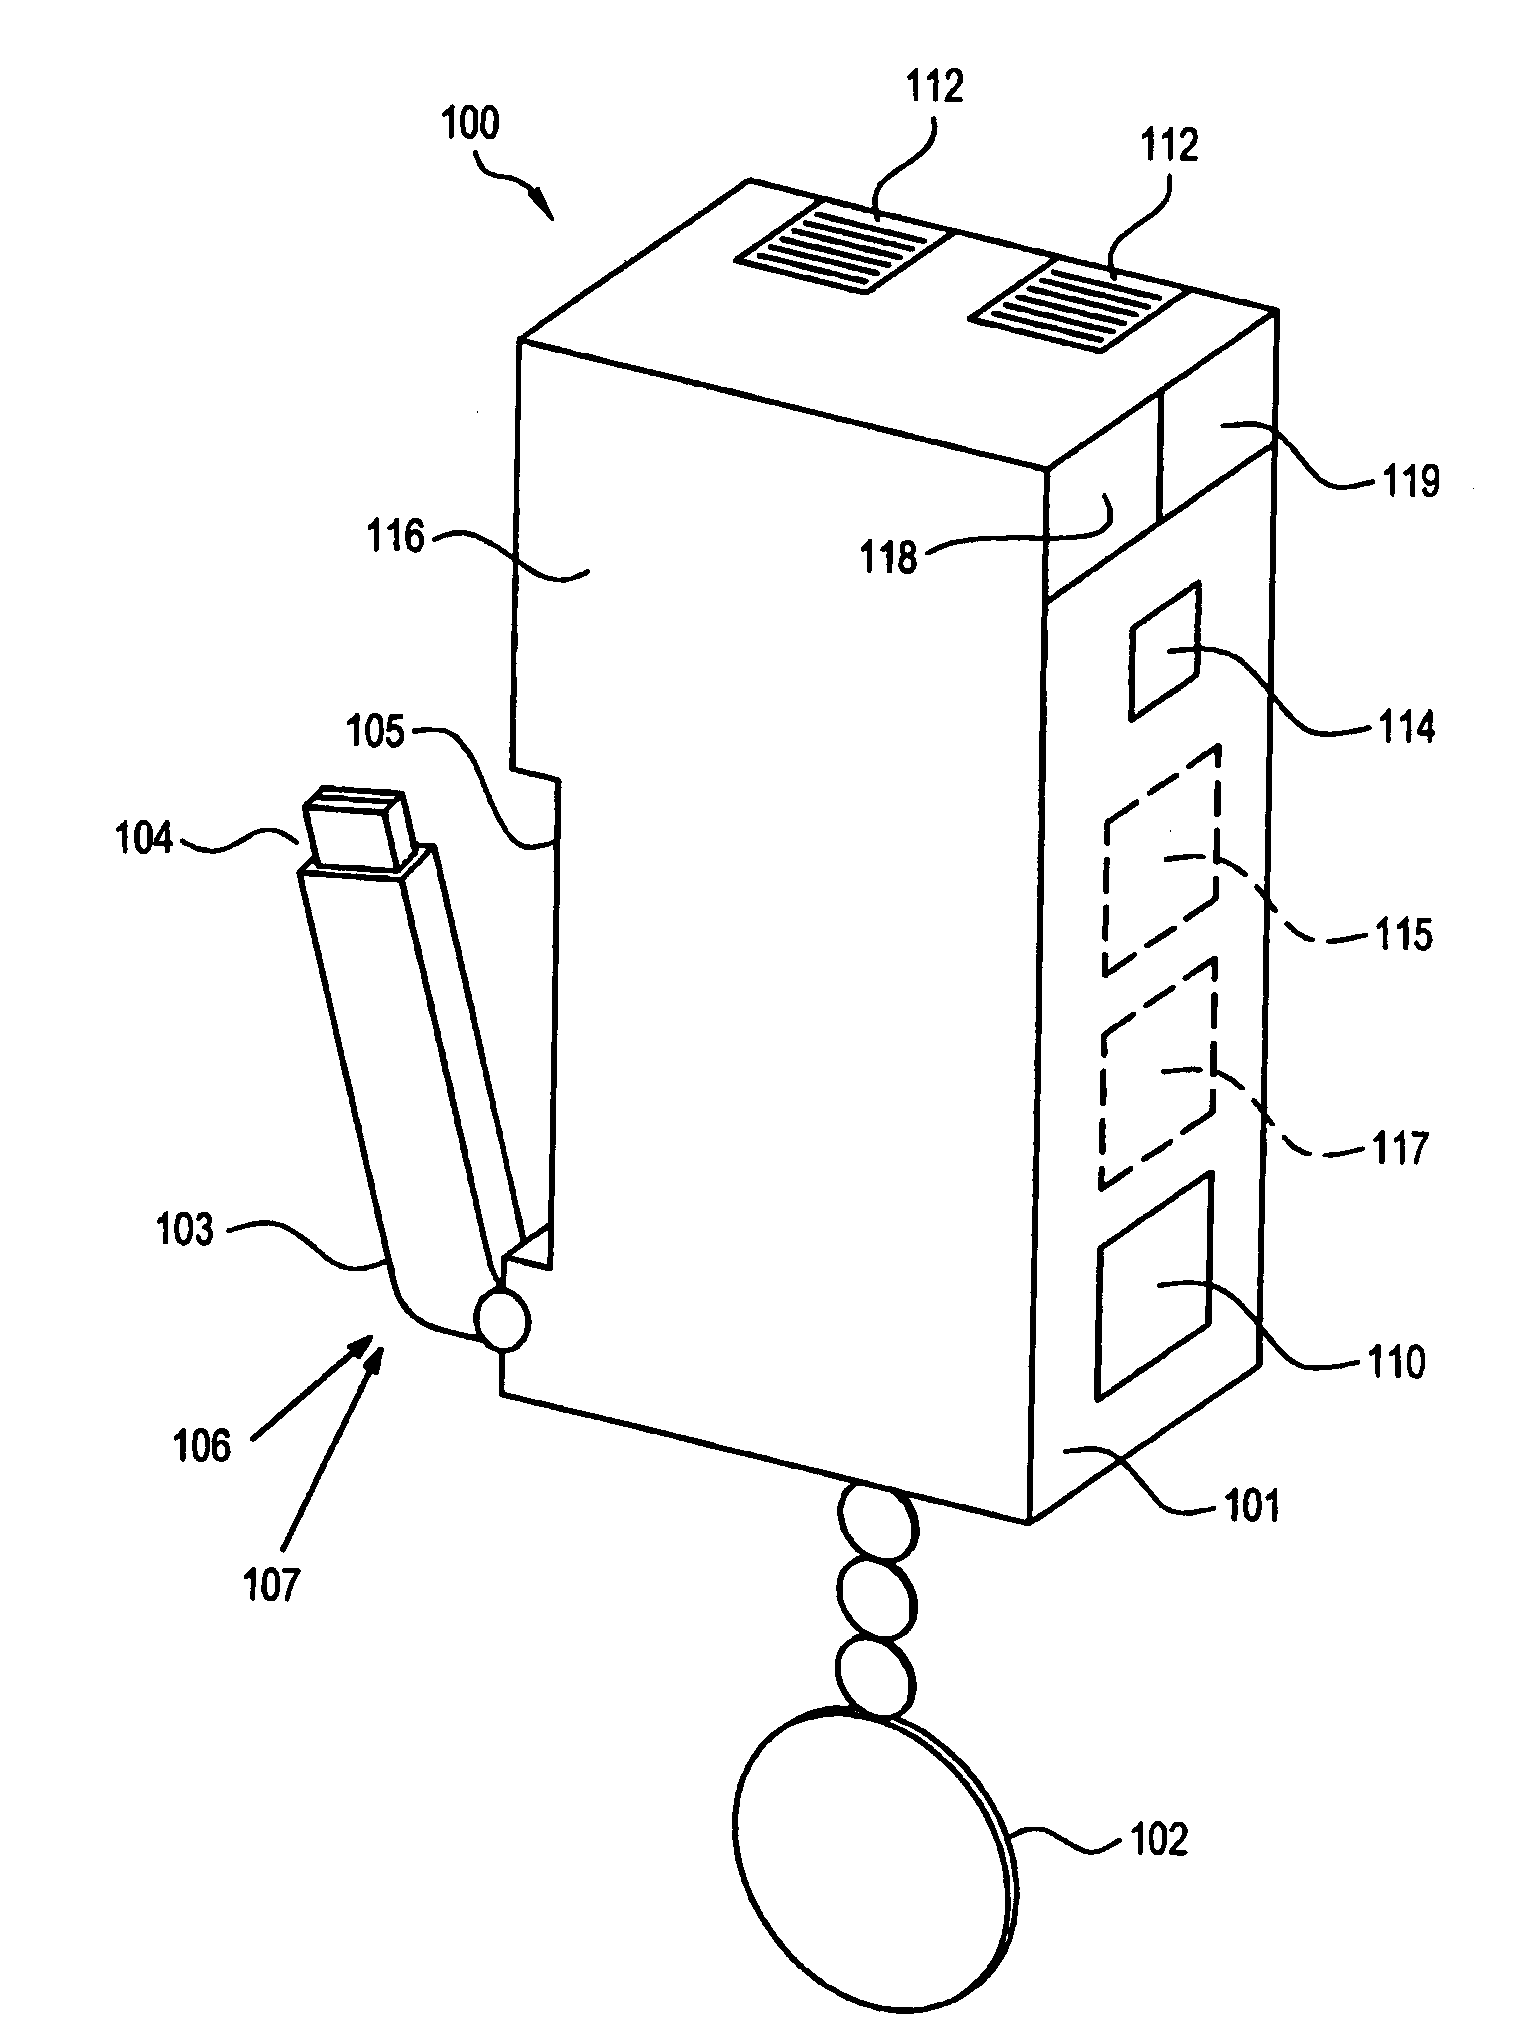 Vehicle parking assistance electronic timer system and method